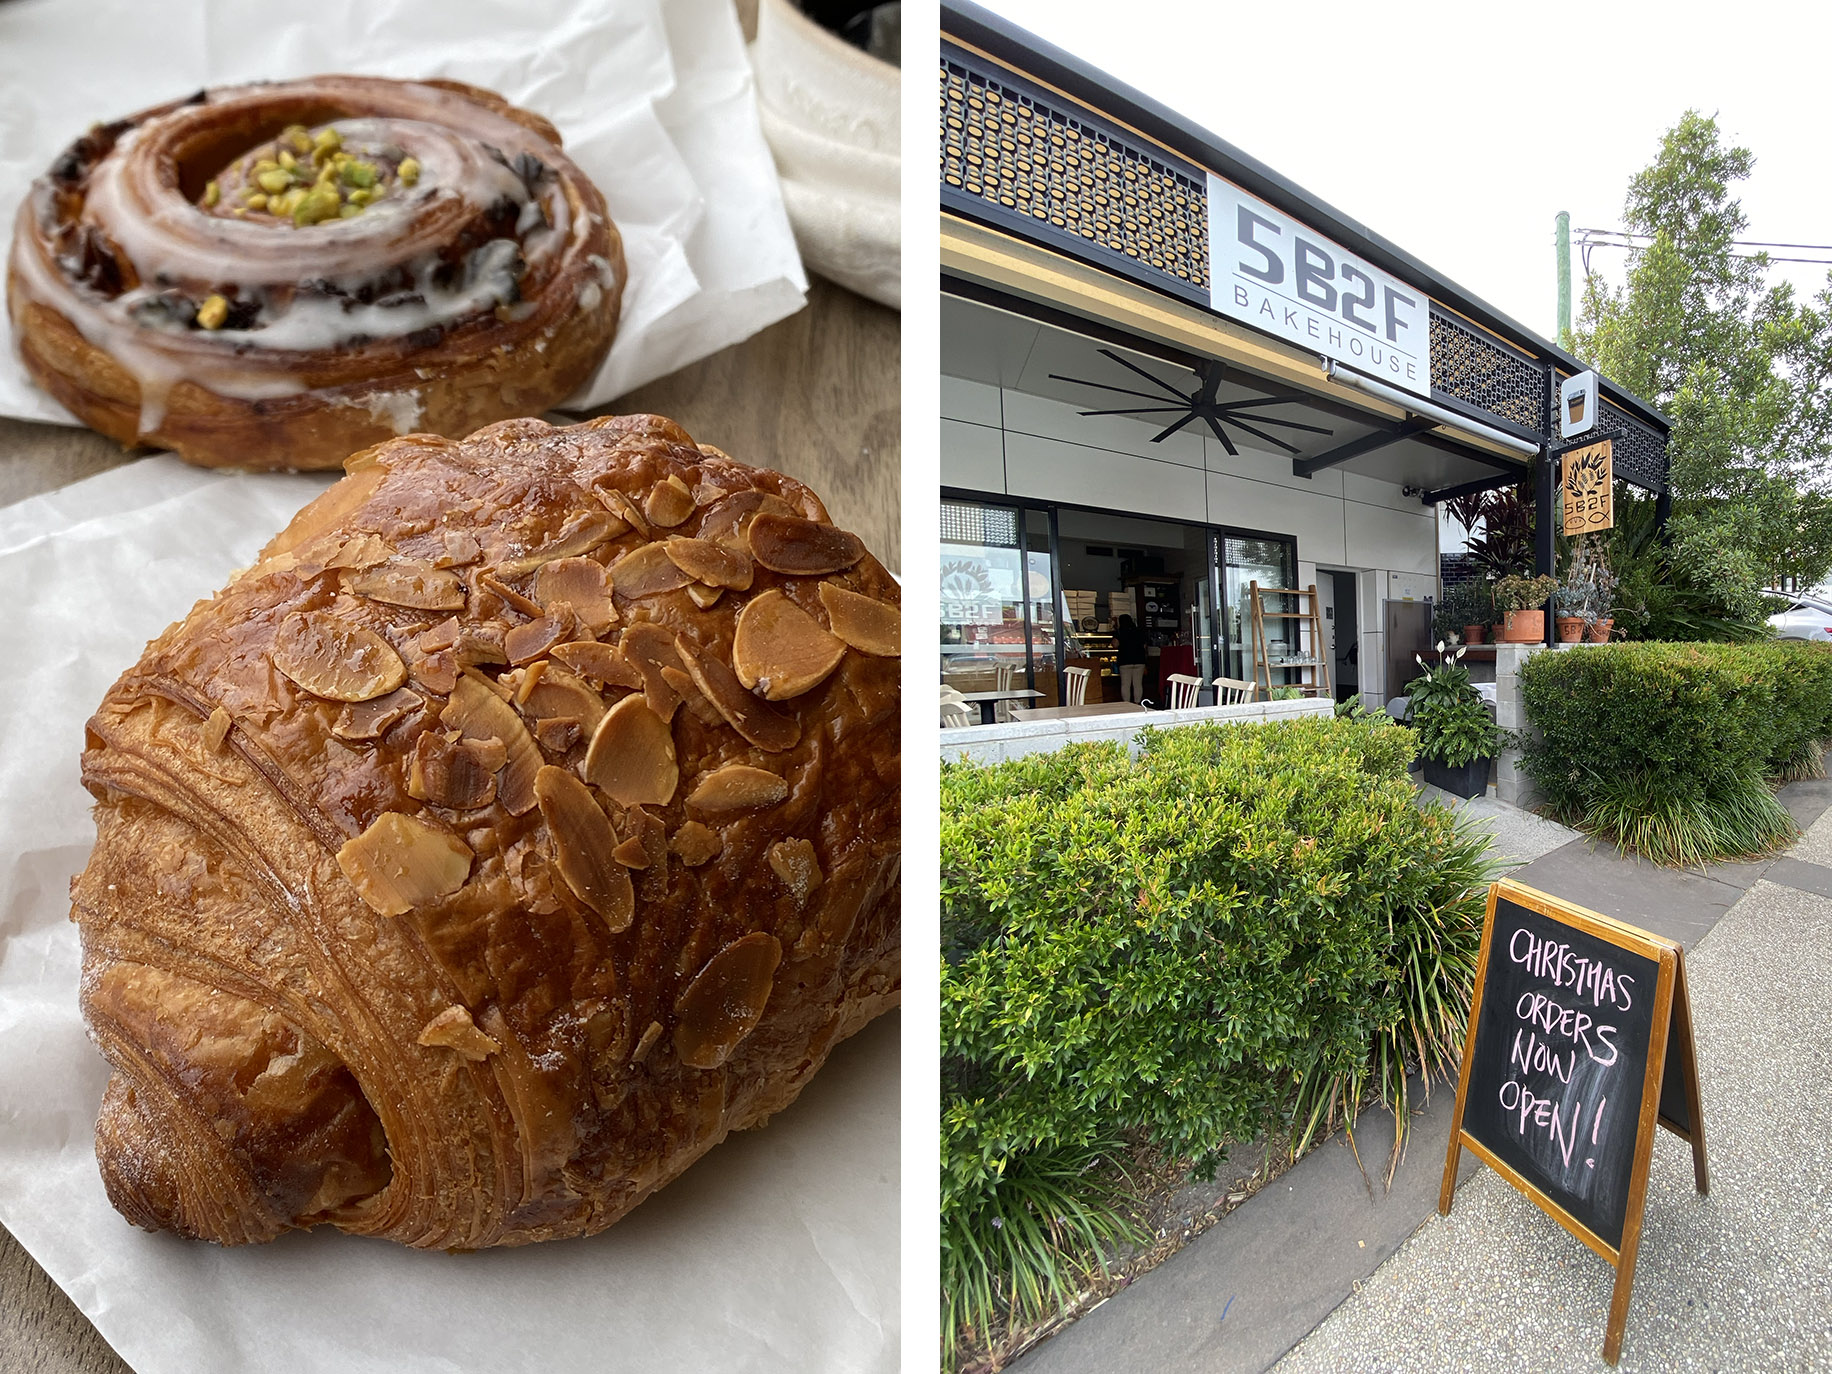 5B2F Bakehouse (Chirn Park) Labrador is one of the Gold Coast's finest patisseries